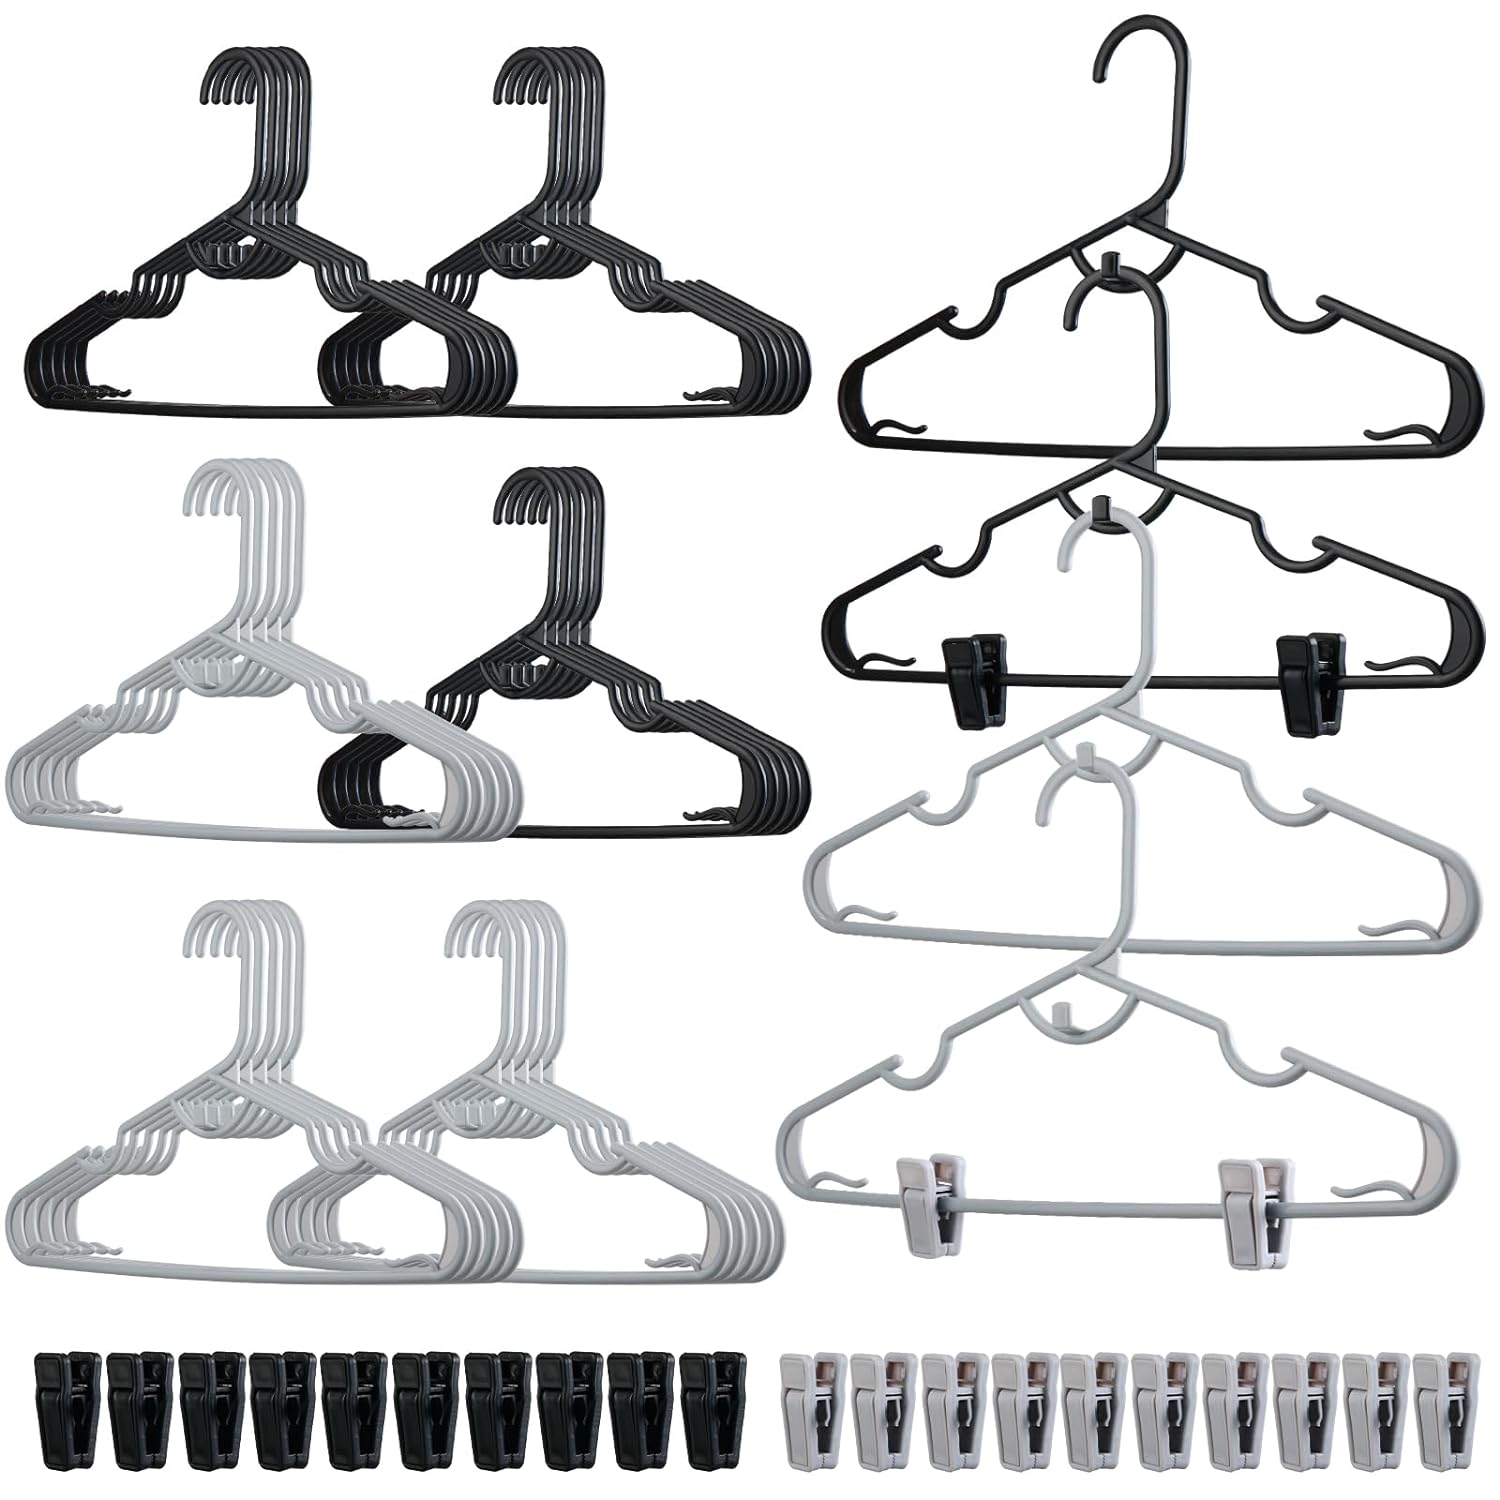 thinkstar 30-Pack Plastic Hangers With Clips Adults Clothes Hangers For Closet Thin Stackable Hangers Space Saving Standard Size S…